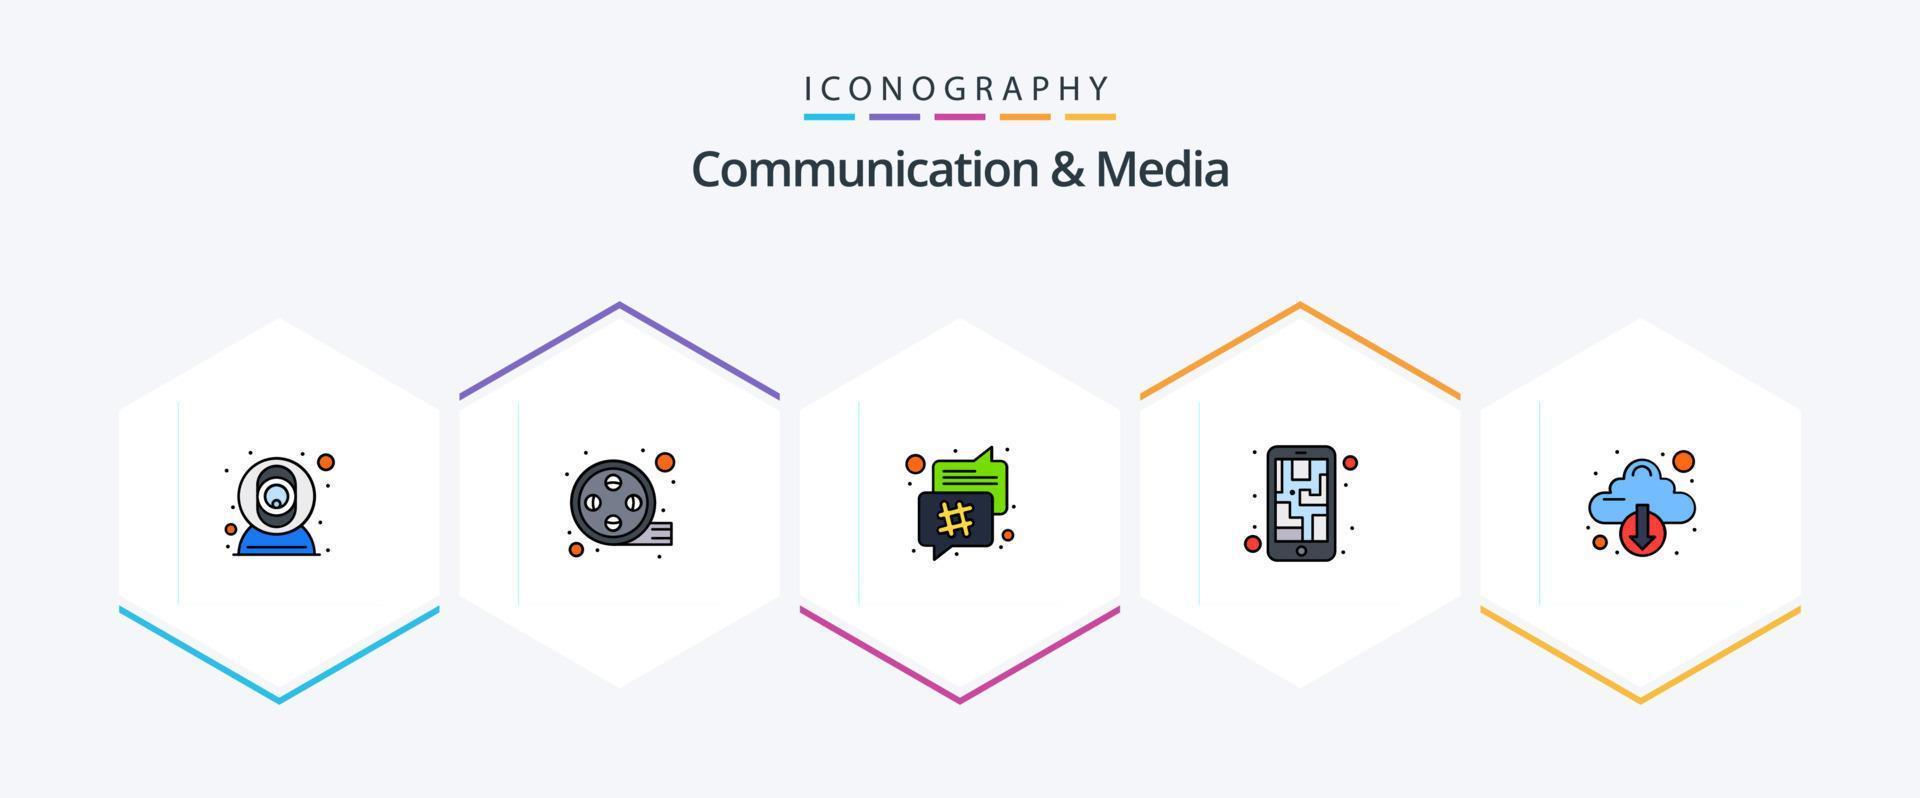 Communication And Media 25 FilledLine icon pack including down. smart phone. chat bubble. phone. map vector